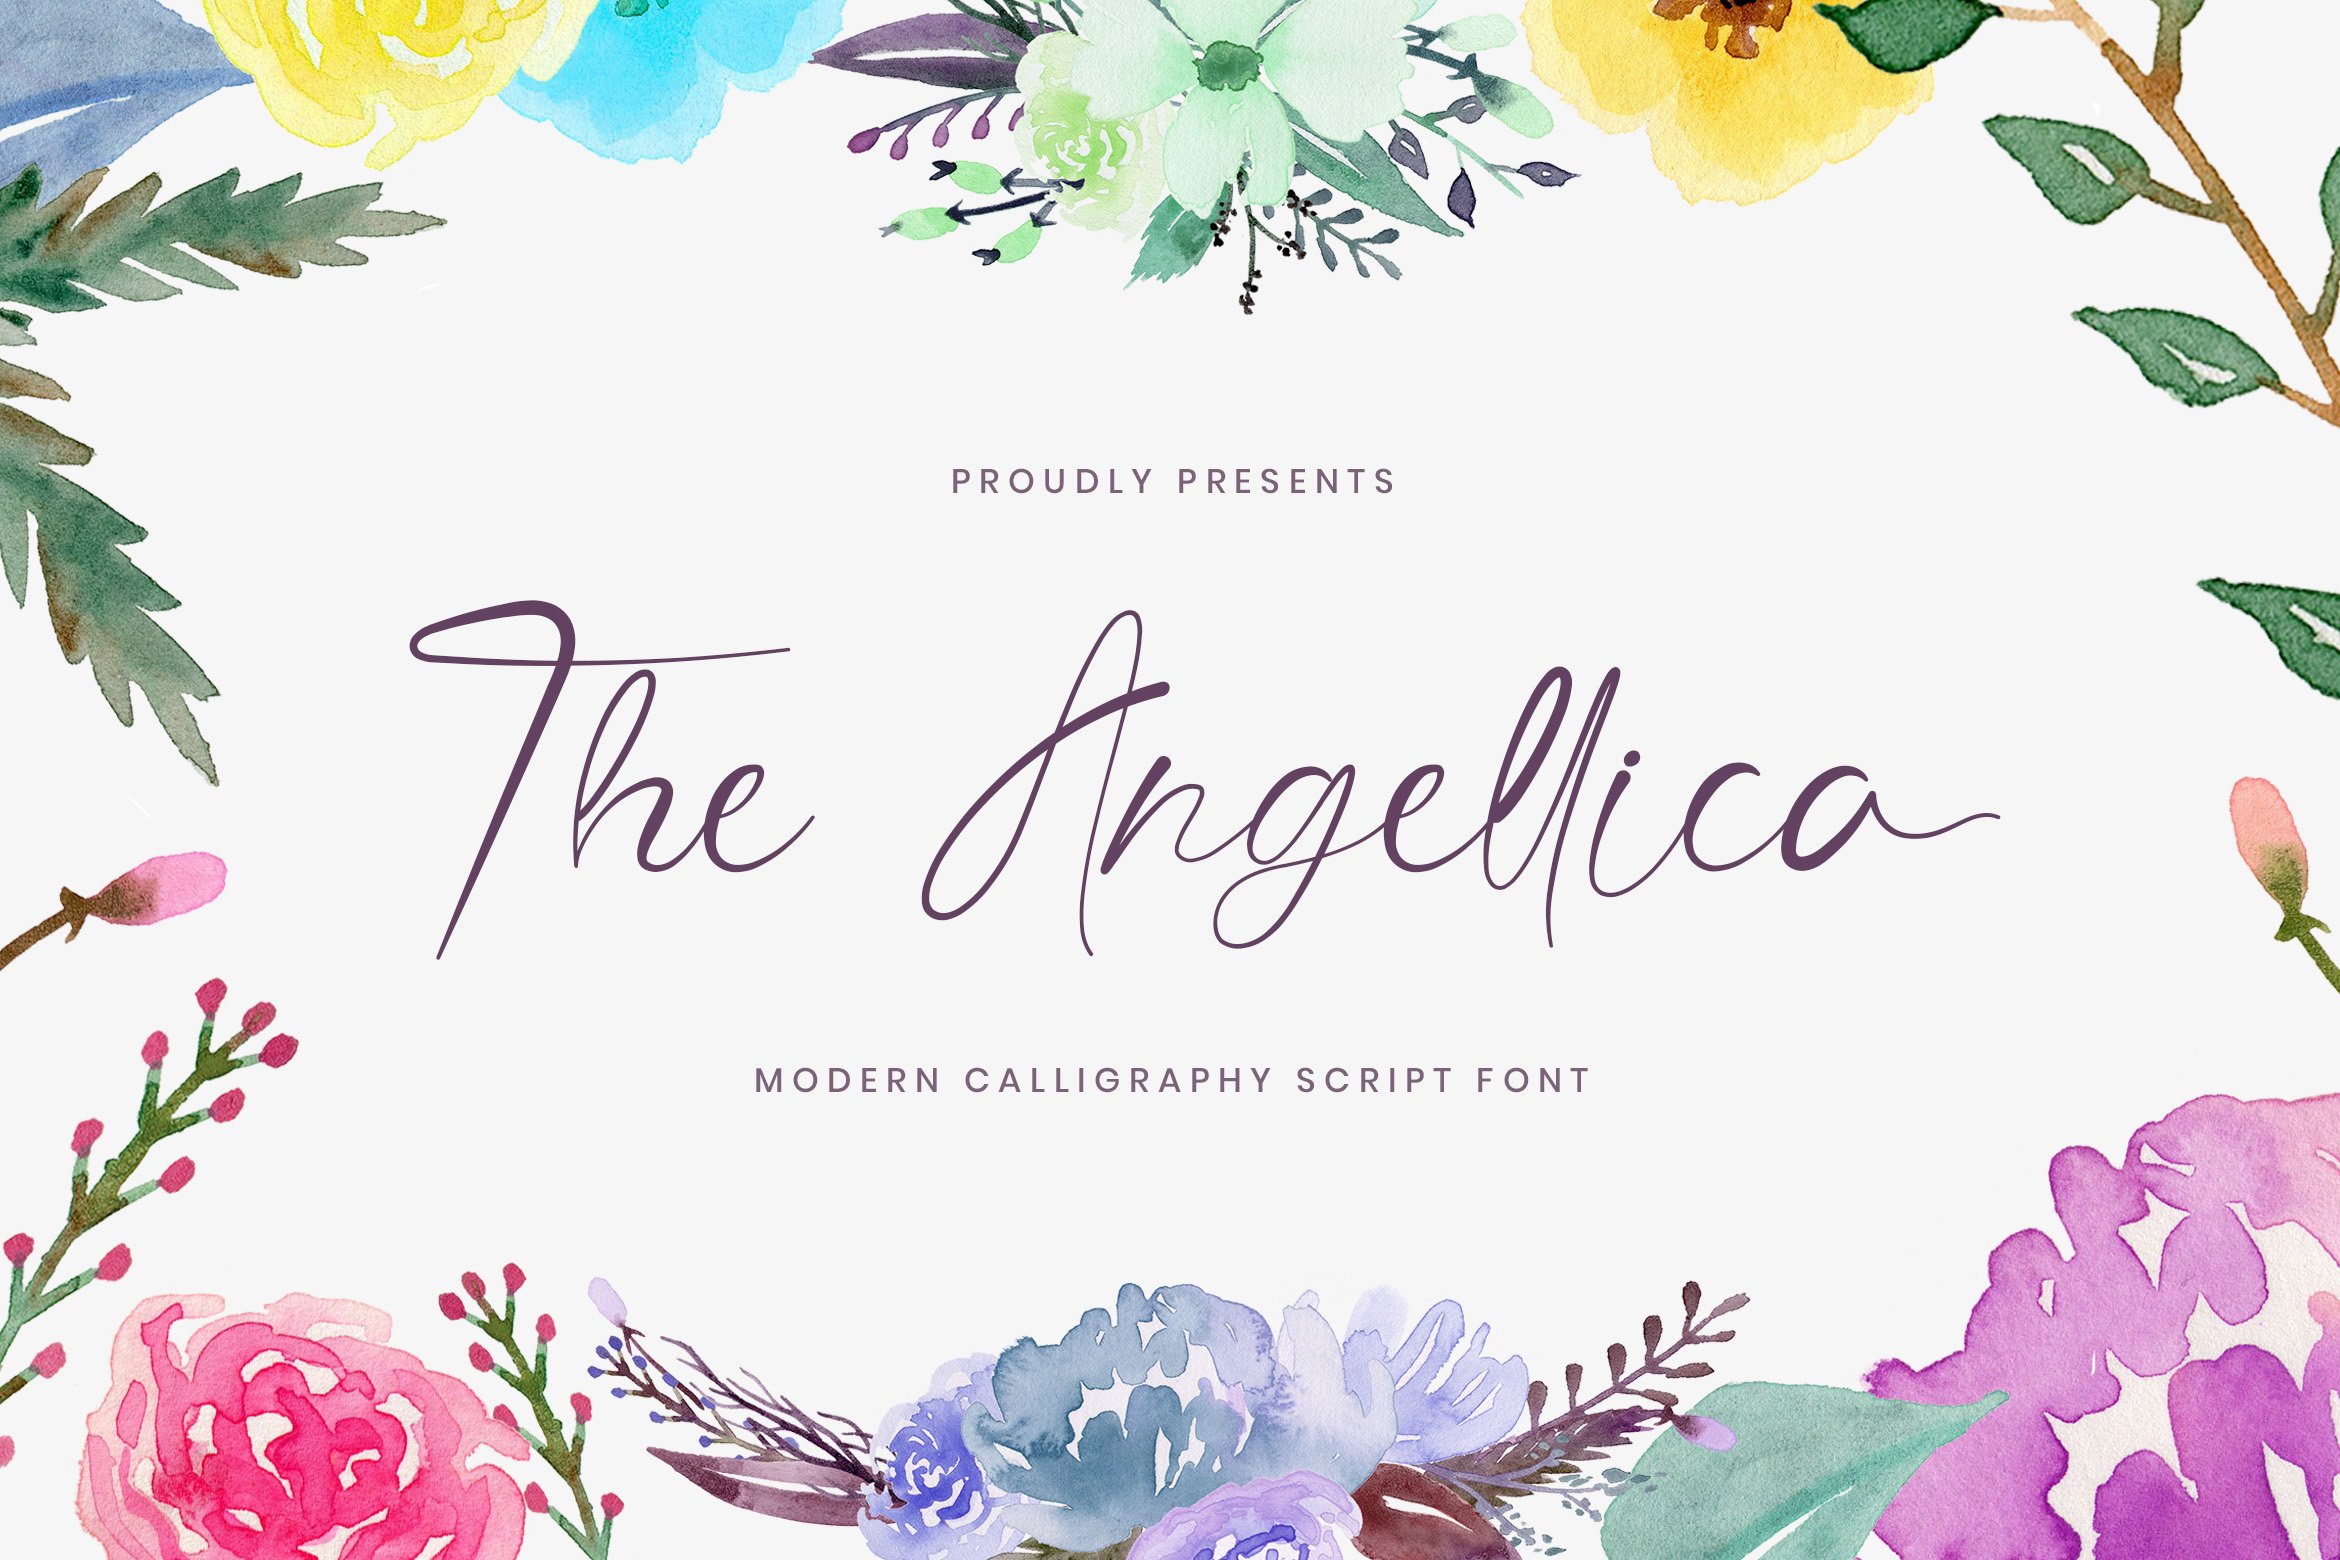 The Angellica - Calligraphy Font cover image.